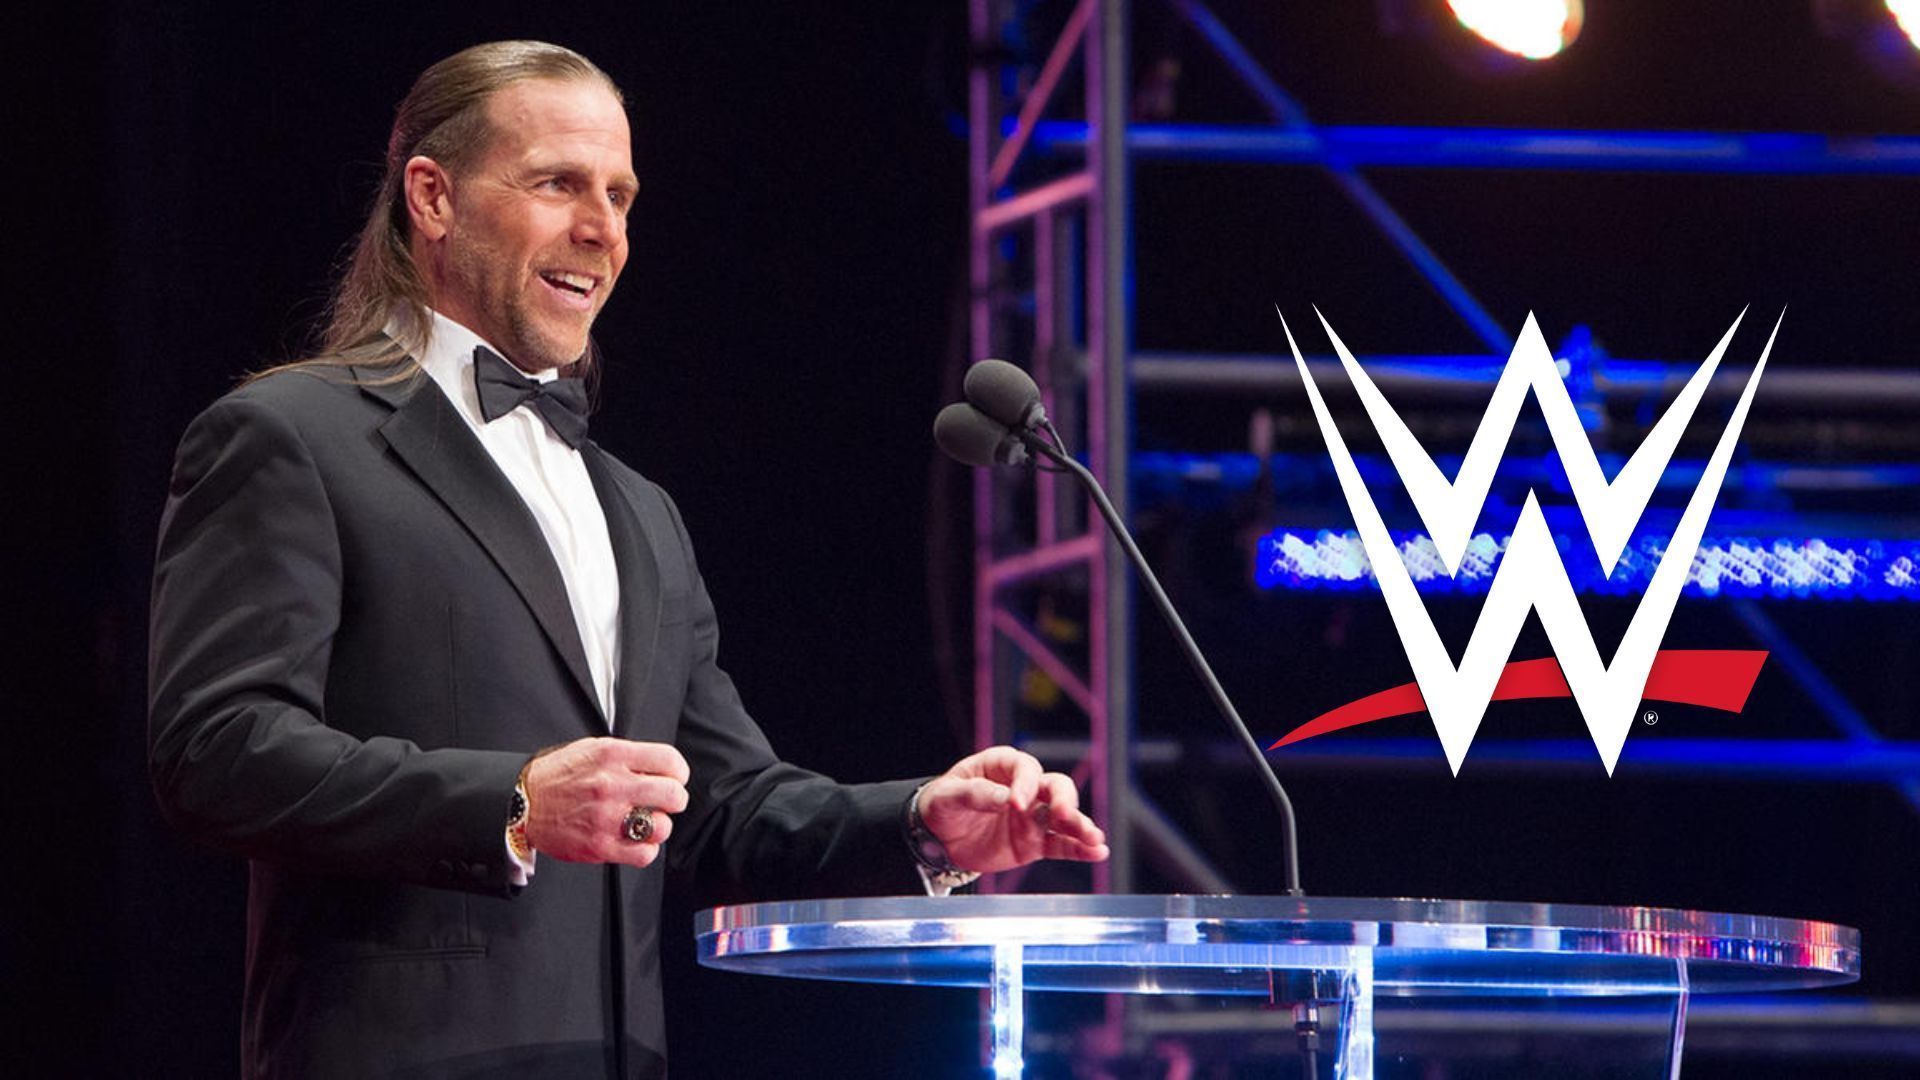 Shawn Michaels was inducted into the WWE Hall of Fame in 2011